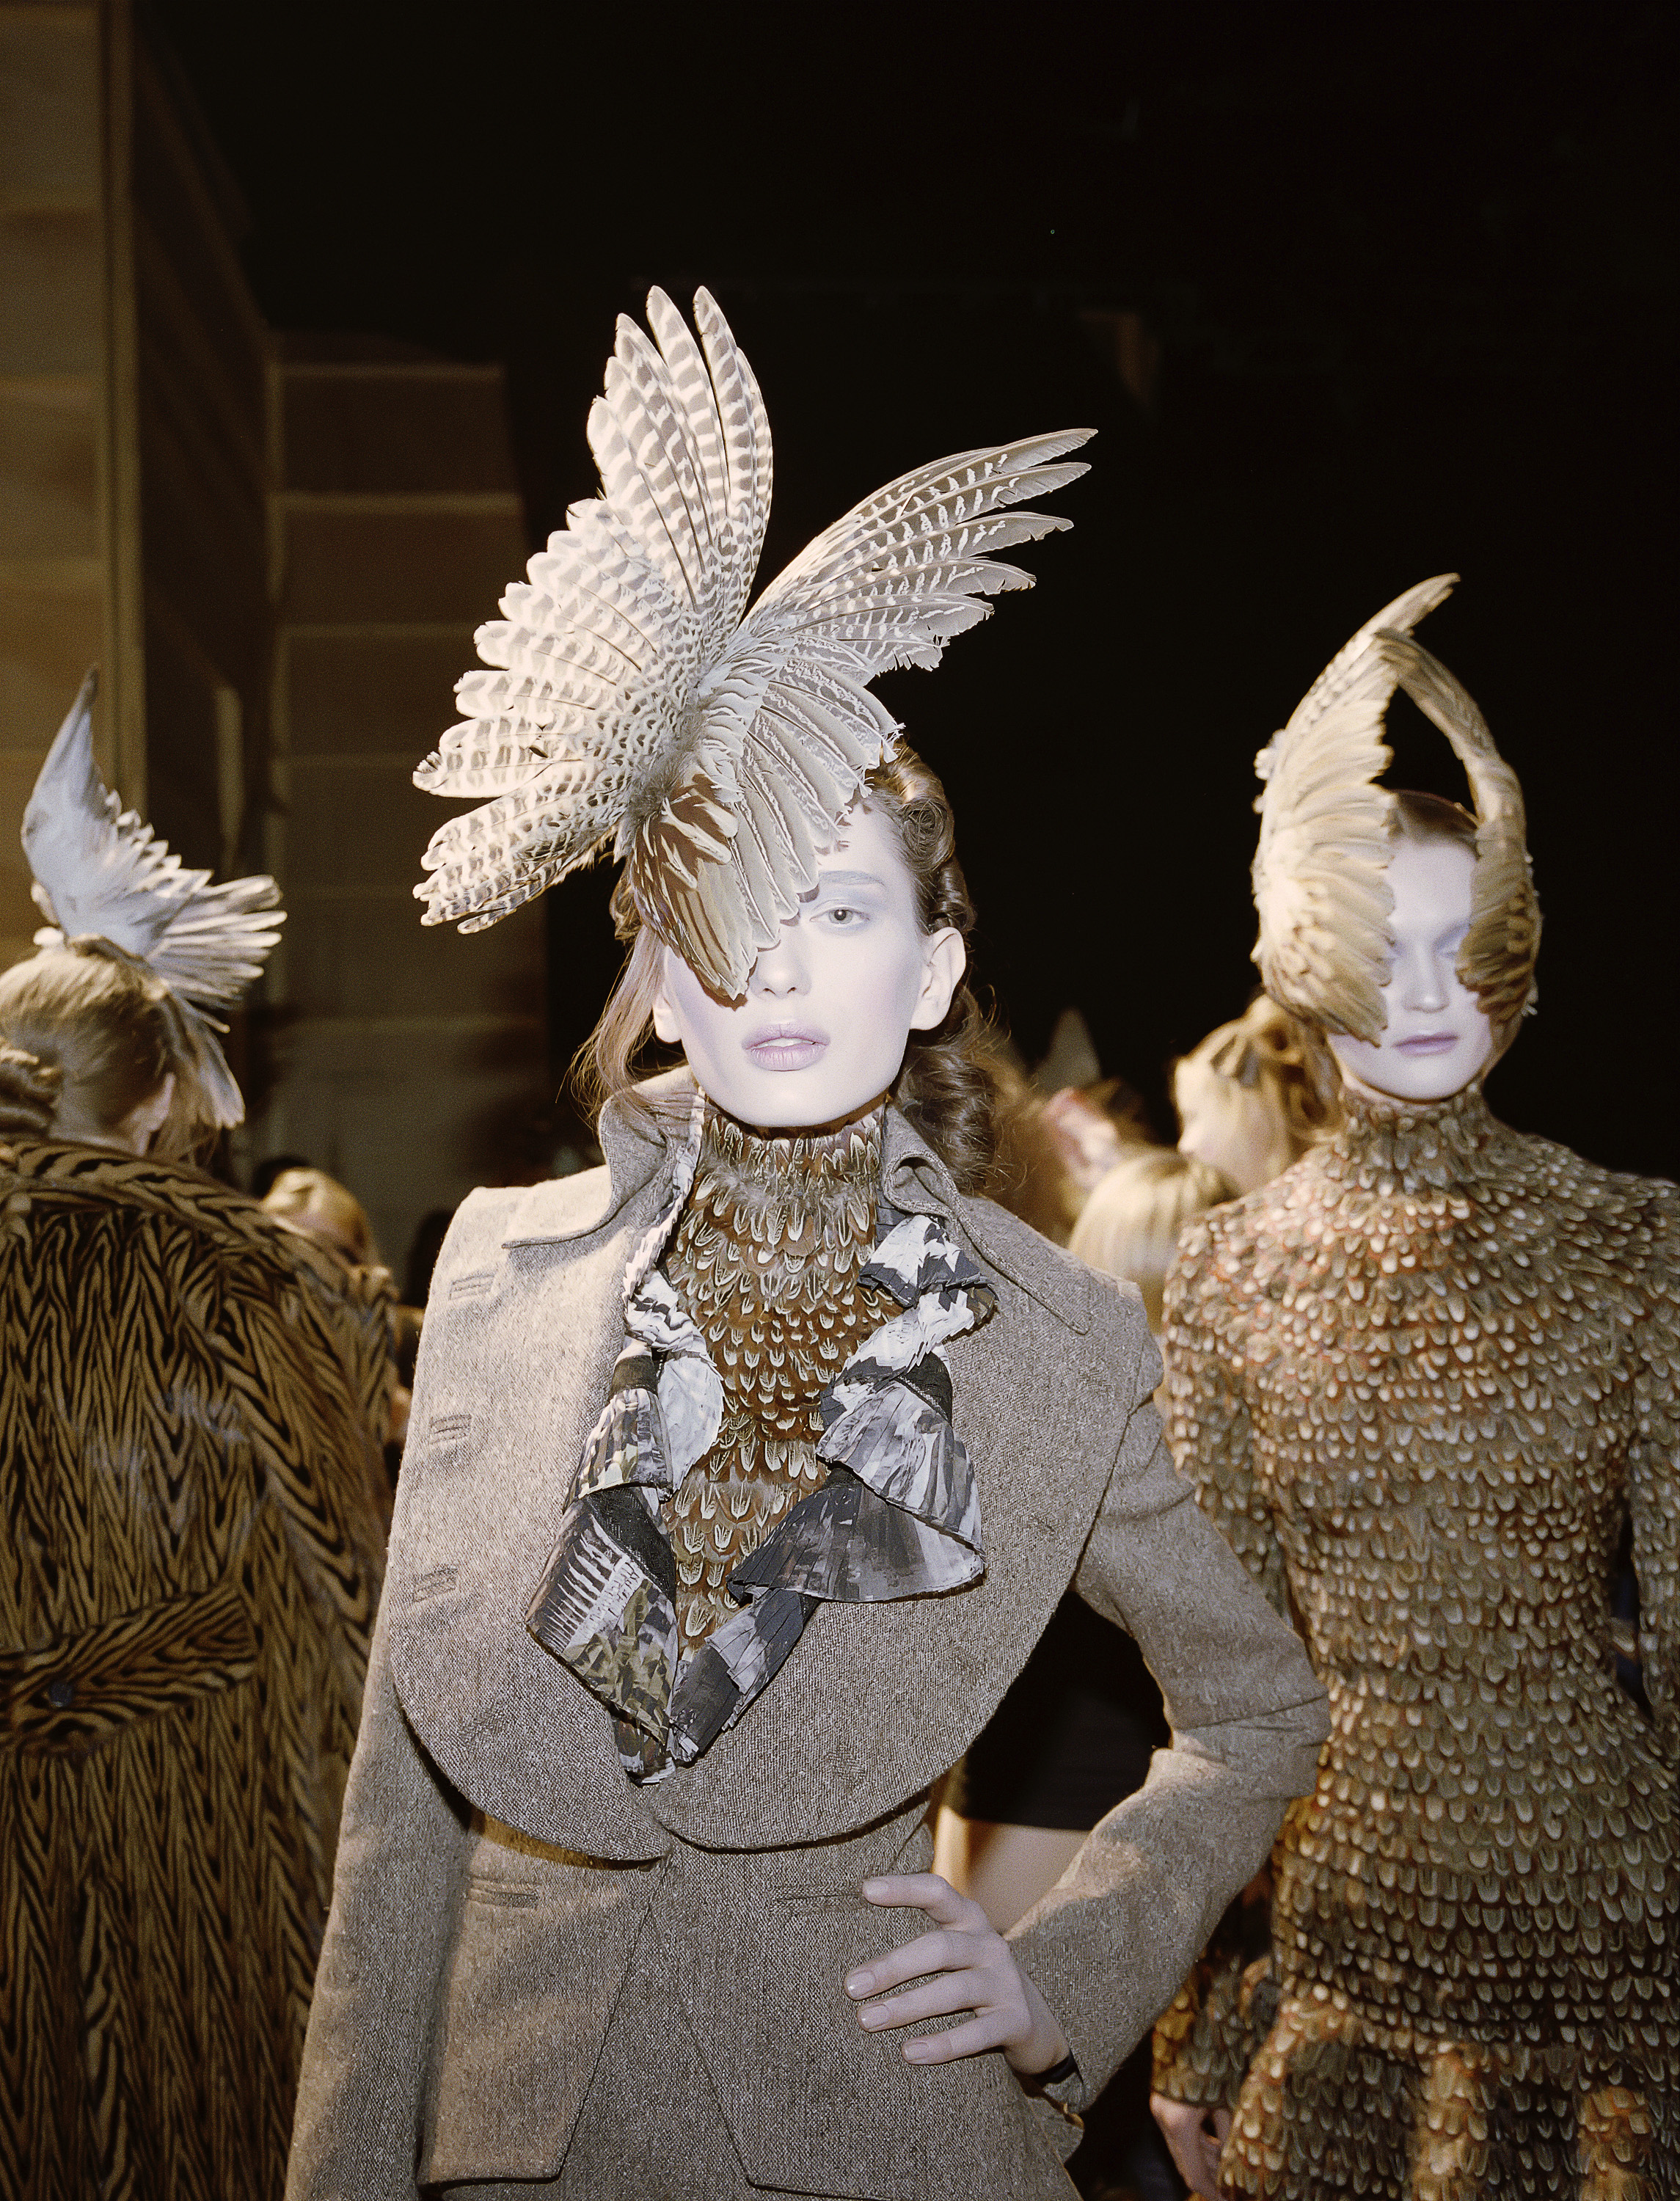 A model poses with one hand on her hip, wearing a feather headdress and unique blazer, her face powdered white